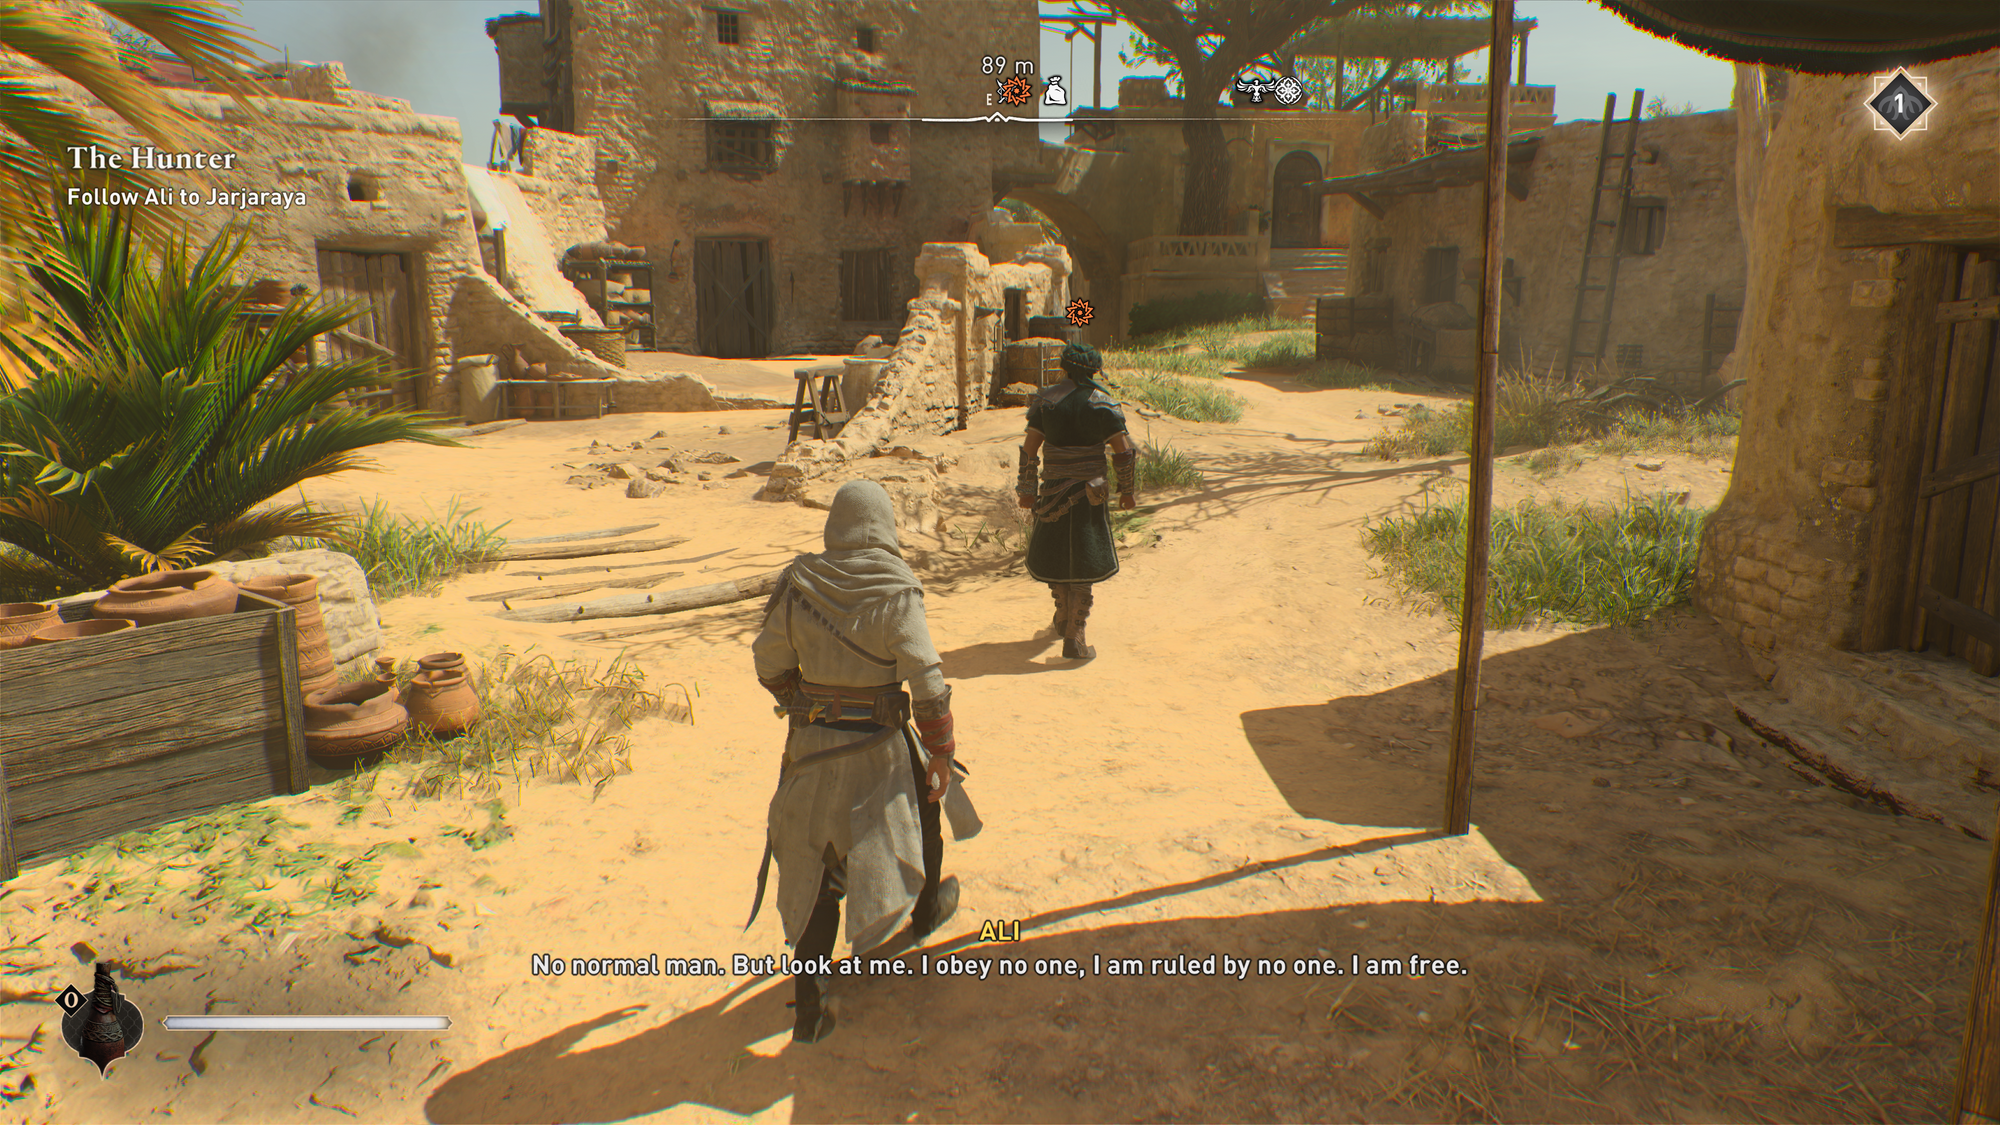 A gameplay screenshot depicting the assassin following behind his interlocutor who is saying, "No normal man. But look at me. I obey no one. I am ruled by no one. I am free."